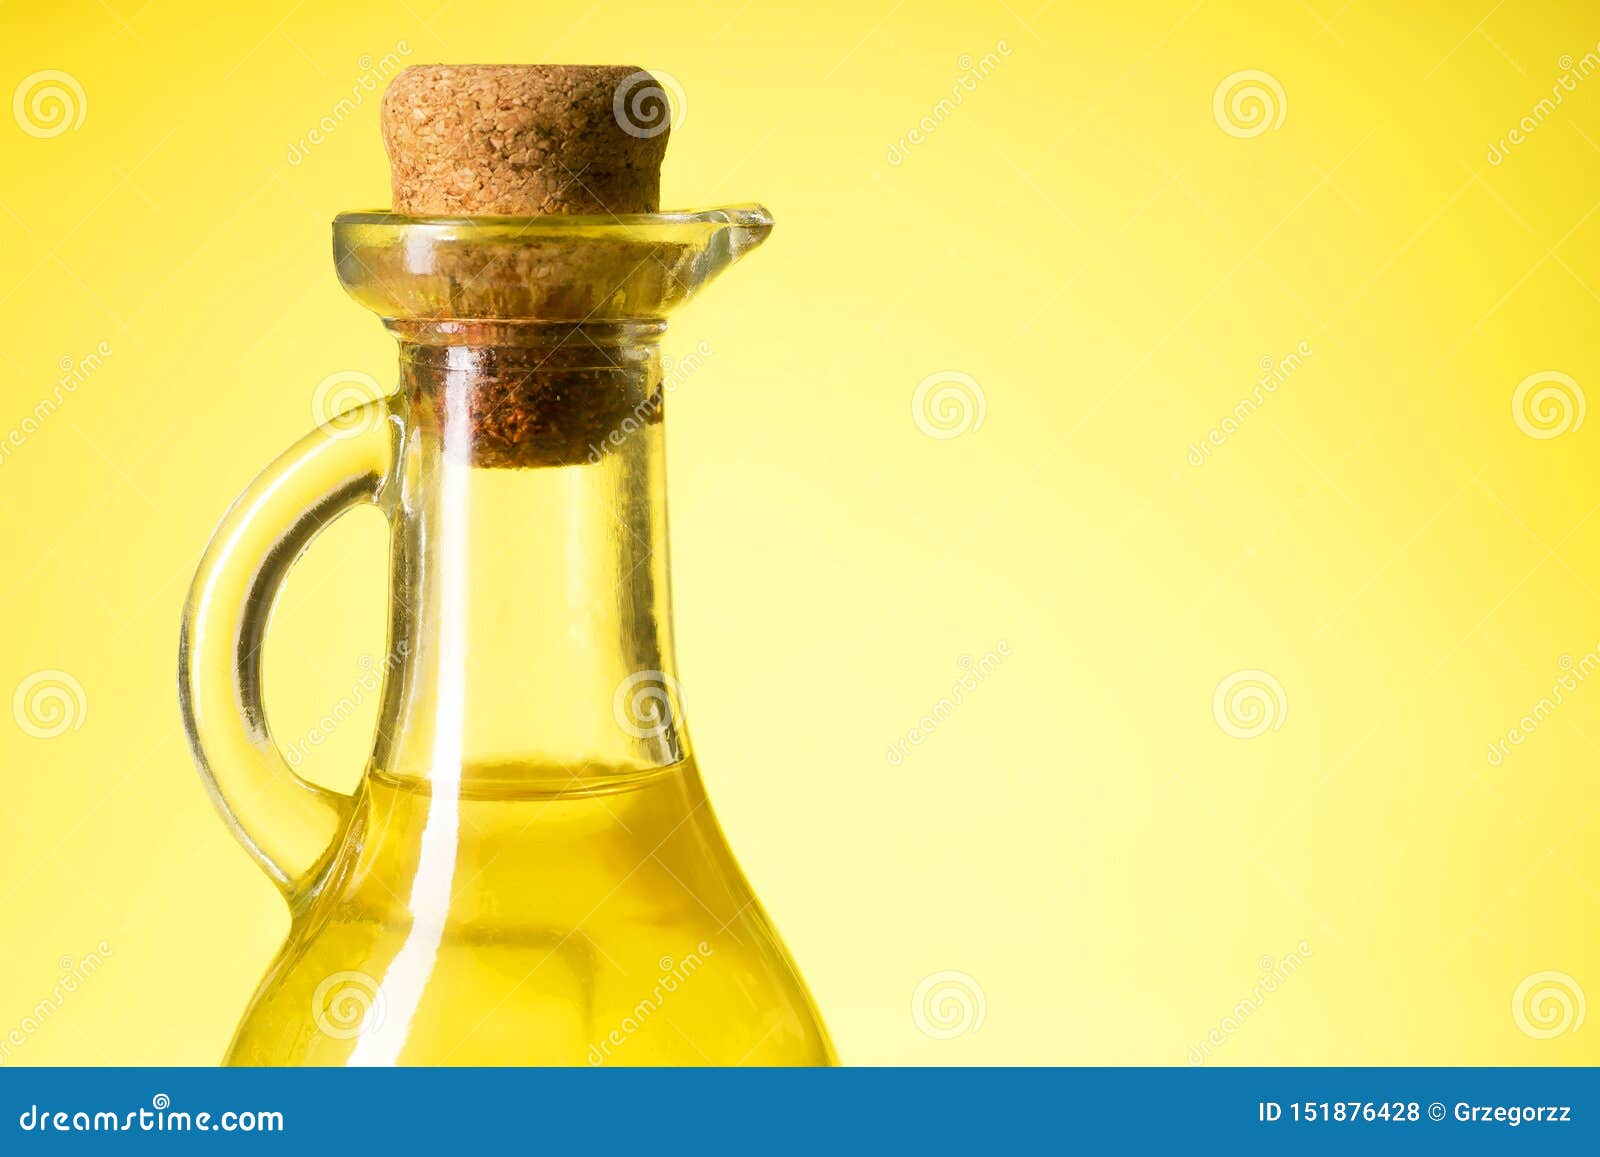 Download A Bottle Of Oil On A Yellow Background Stock Photo Image Of Flora Health 151876428 Yellowimages Mockups